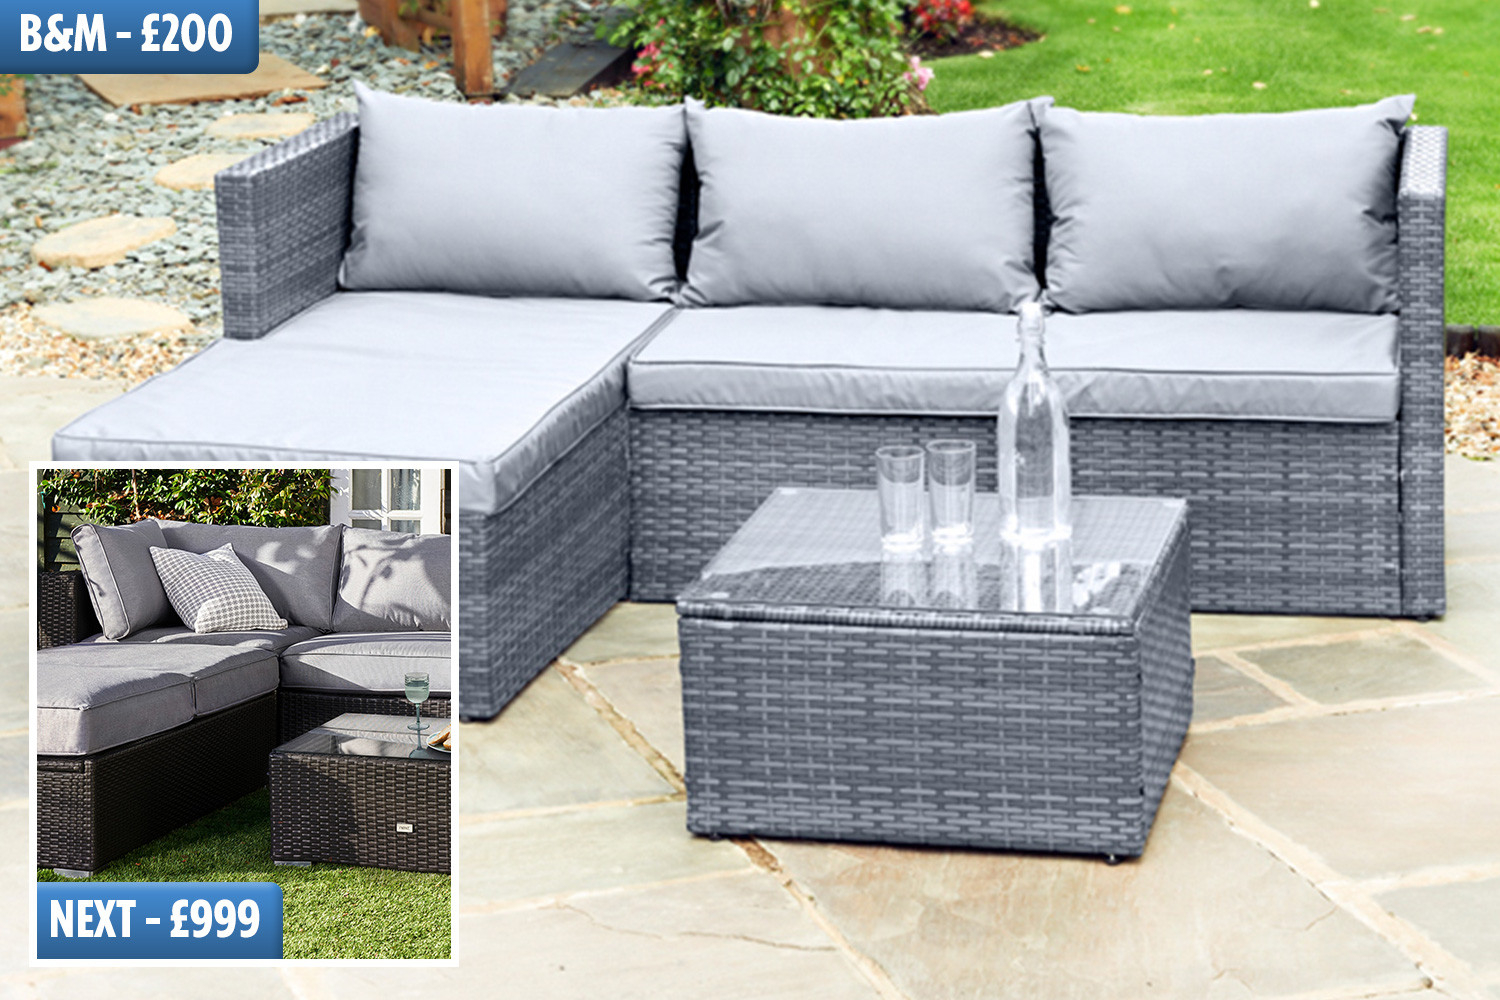 Bms Stunning Garden Sofa Furniture Is 800 Cheaper Than in size 1500 X 1000